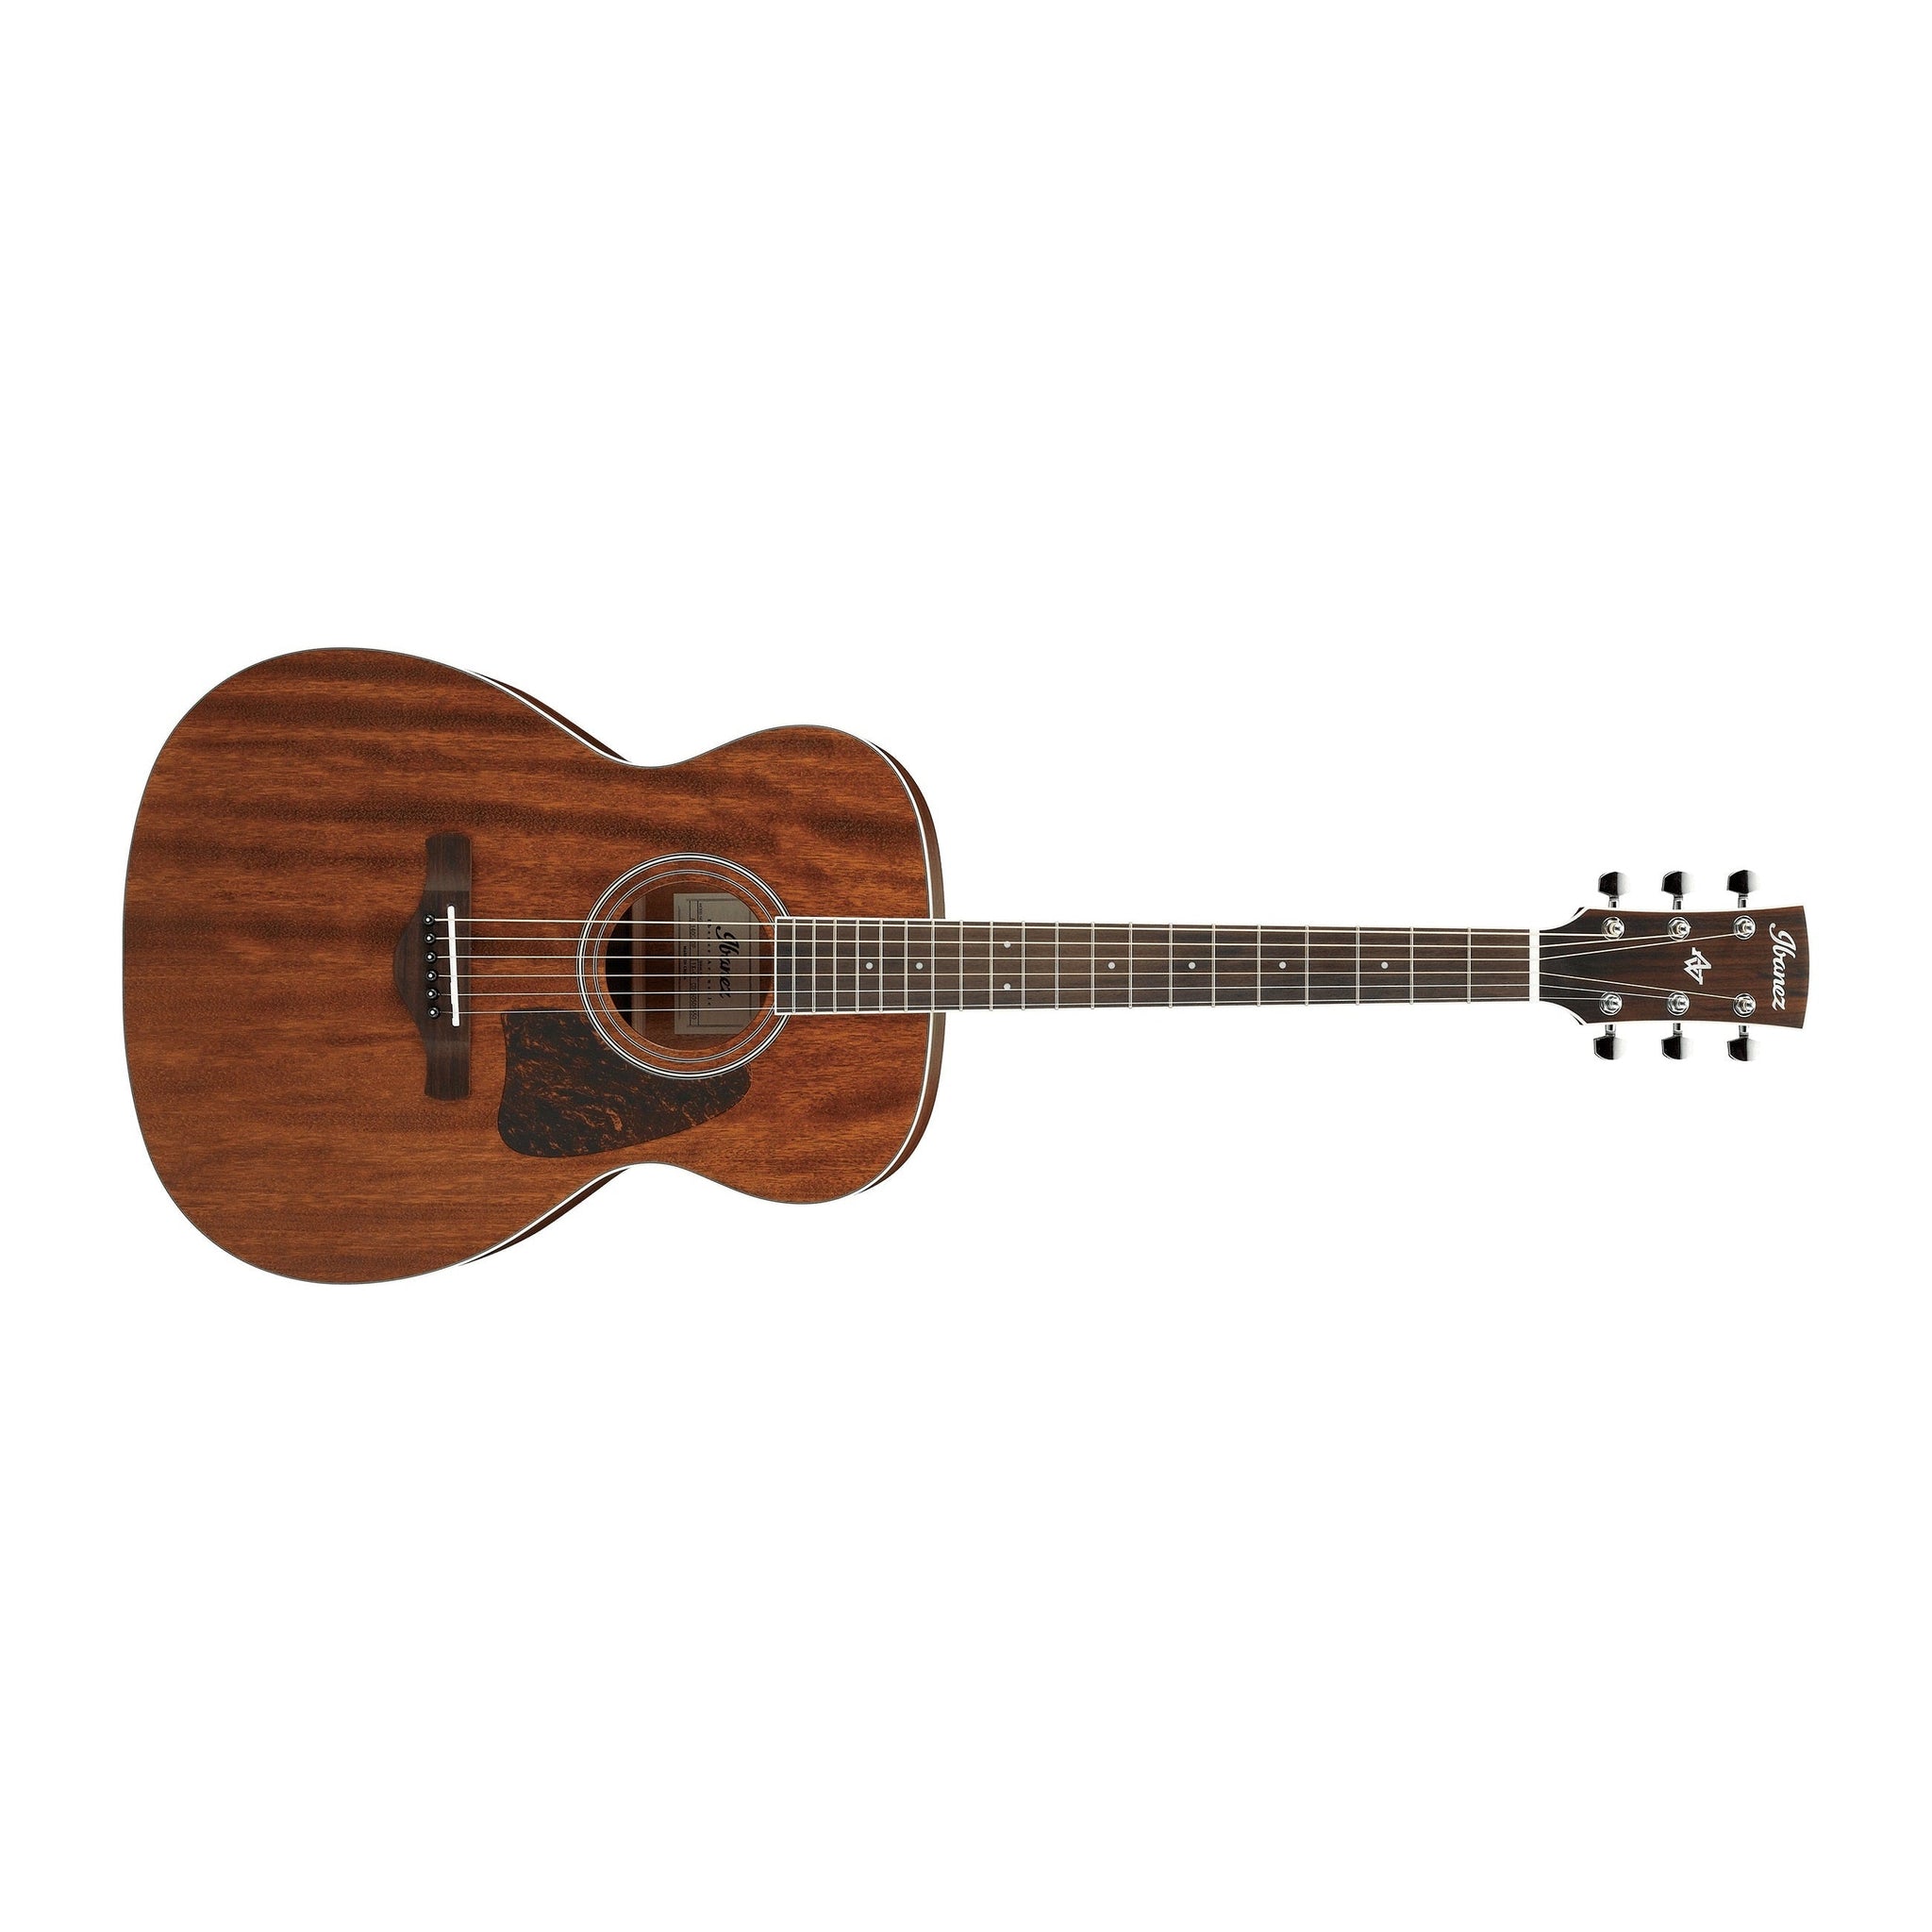 Ibanez AC340-OPN Artwood Series Grand Concert Acoustic Guitar-Open Pore Natural-Music World Academy